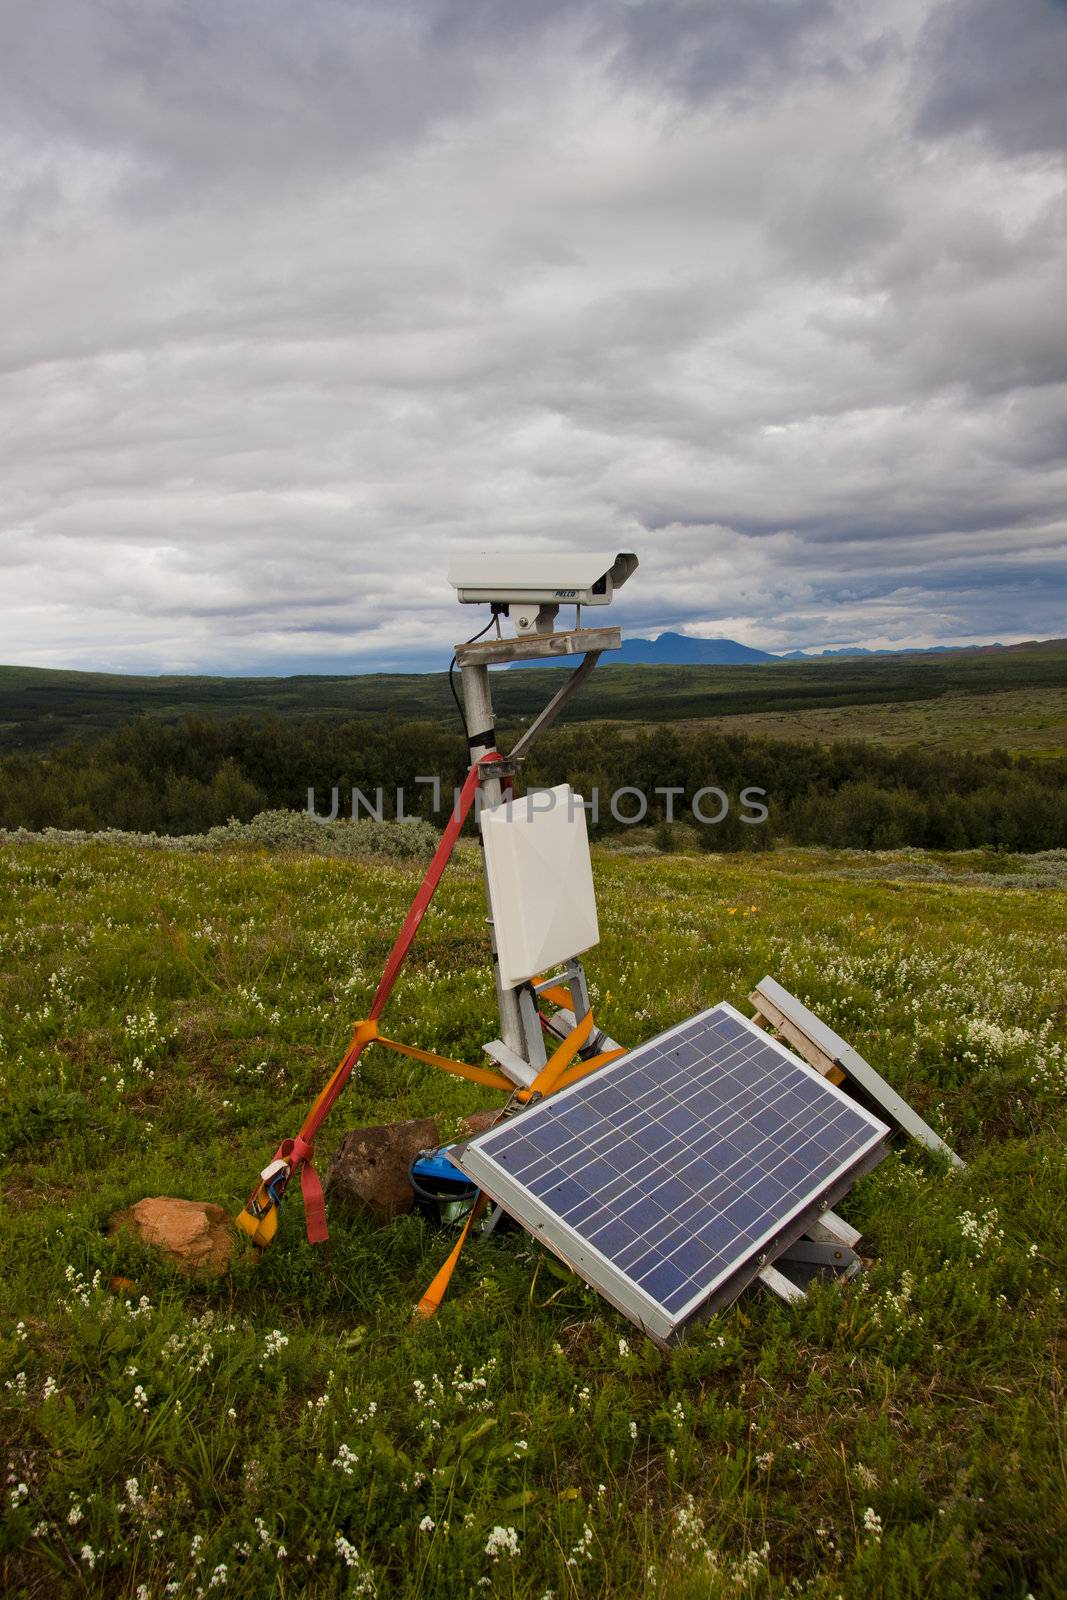 Security camera with solar in nature - Iceland